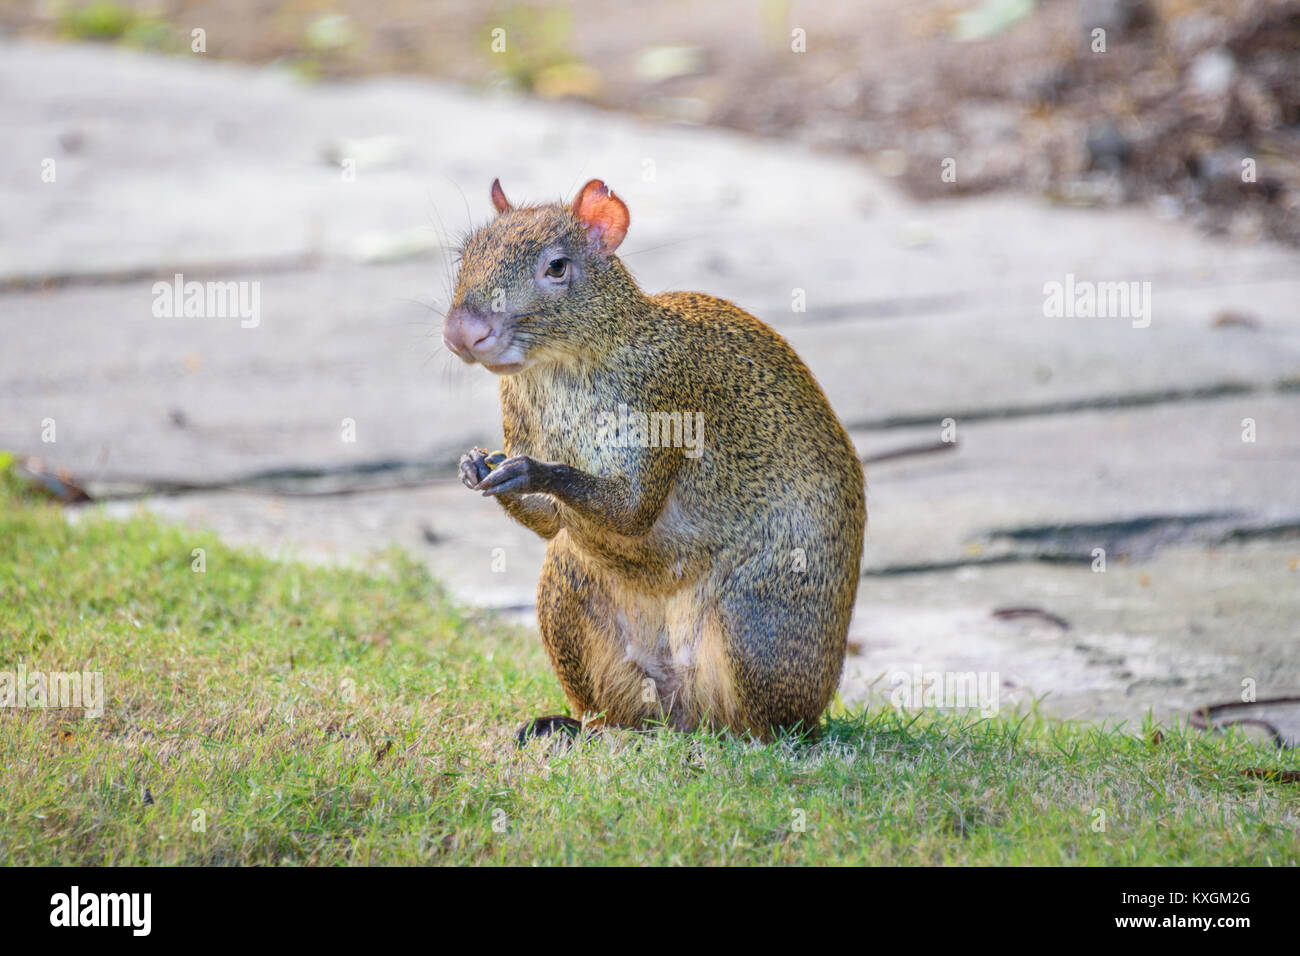 Agouti agoutis or Sereque rodent sitting on the grass holding some food in paws. Rodents of the Caribbean. Stock Photo